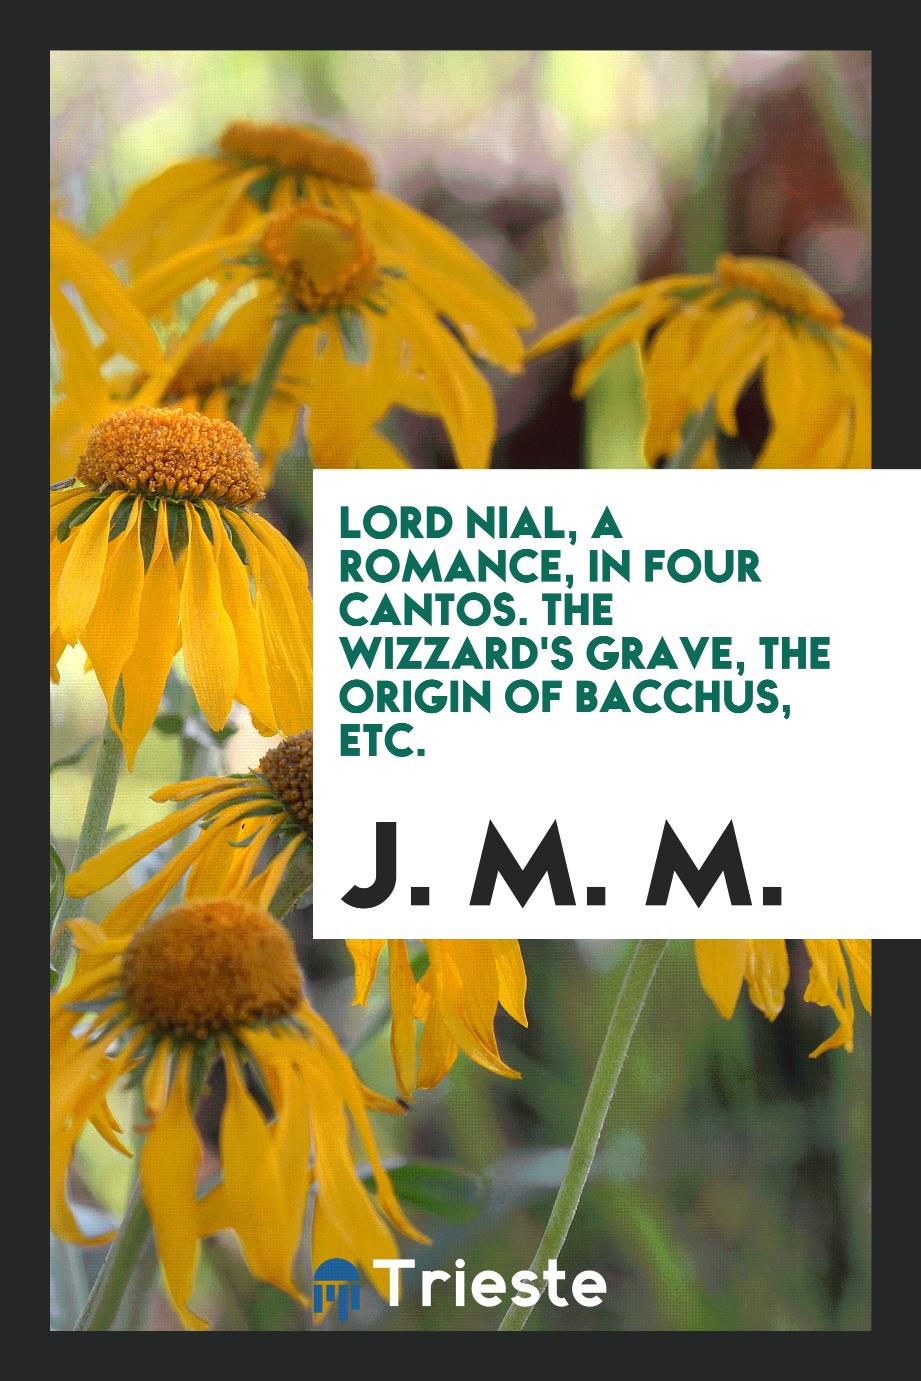 Lord Nial, a romance, in four cantos. The Wizzard's grave, The origin of Bacchus, etc.